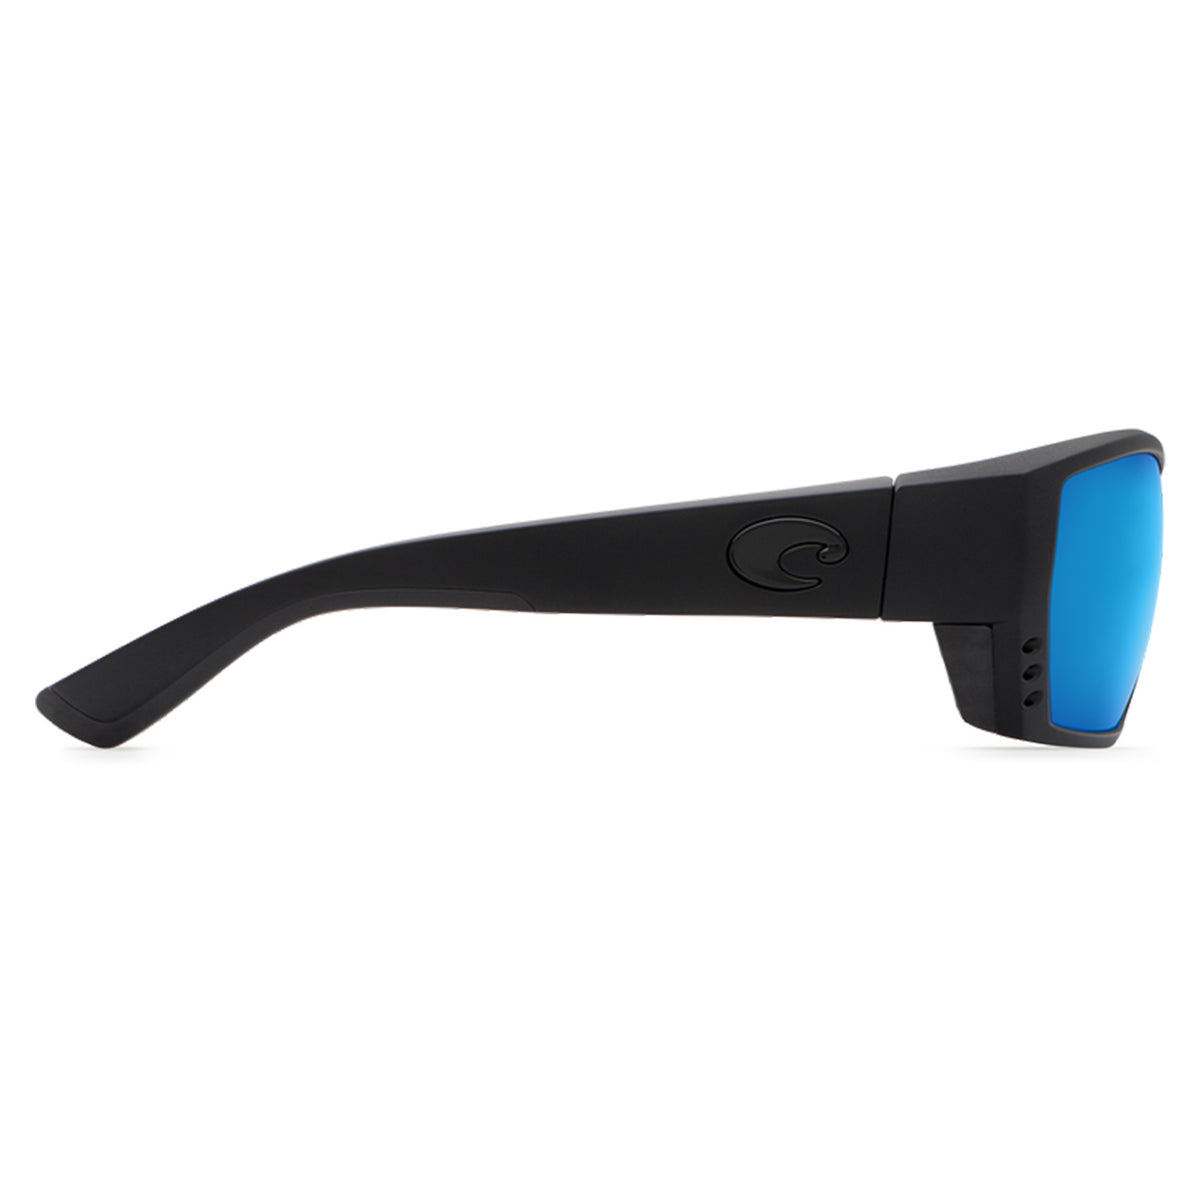 Tuna Alley Blackout Frame with Blue Mirror 580G